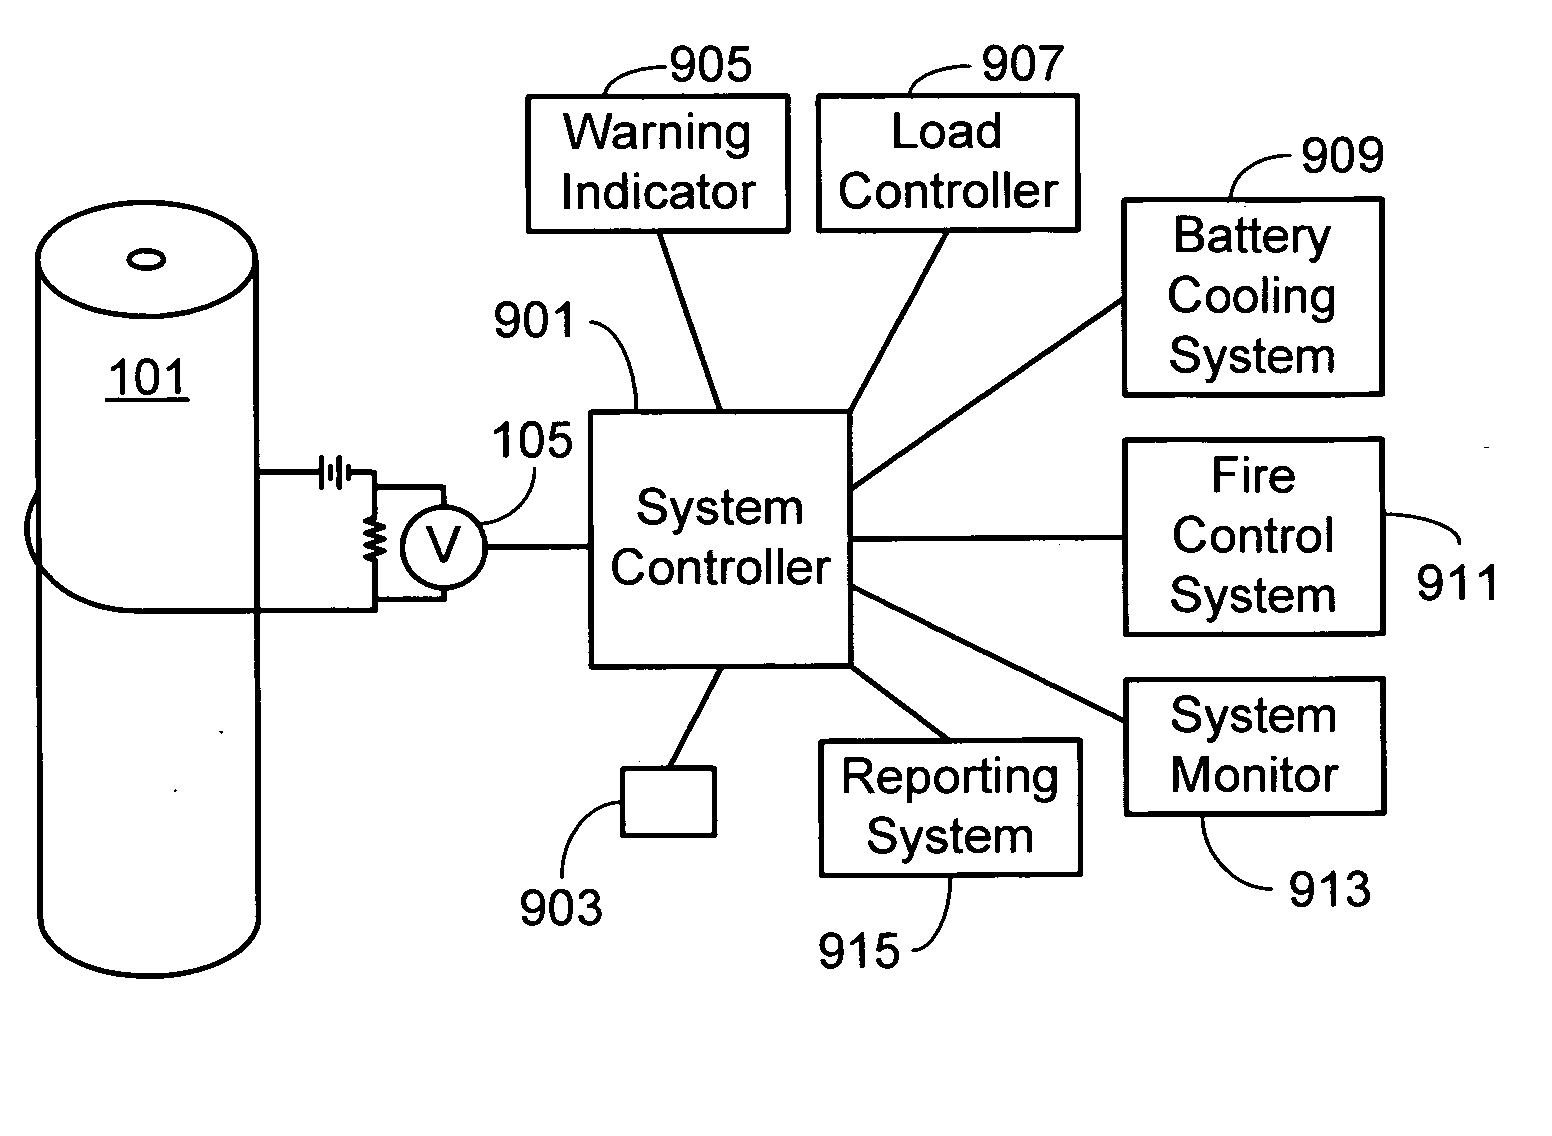 Battery thermal event detection system using an electrical conductor with a thermally interruptible insulator